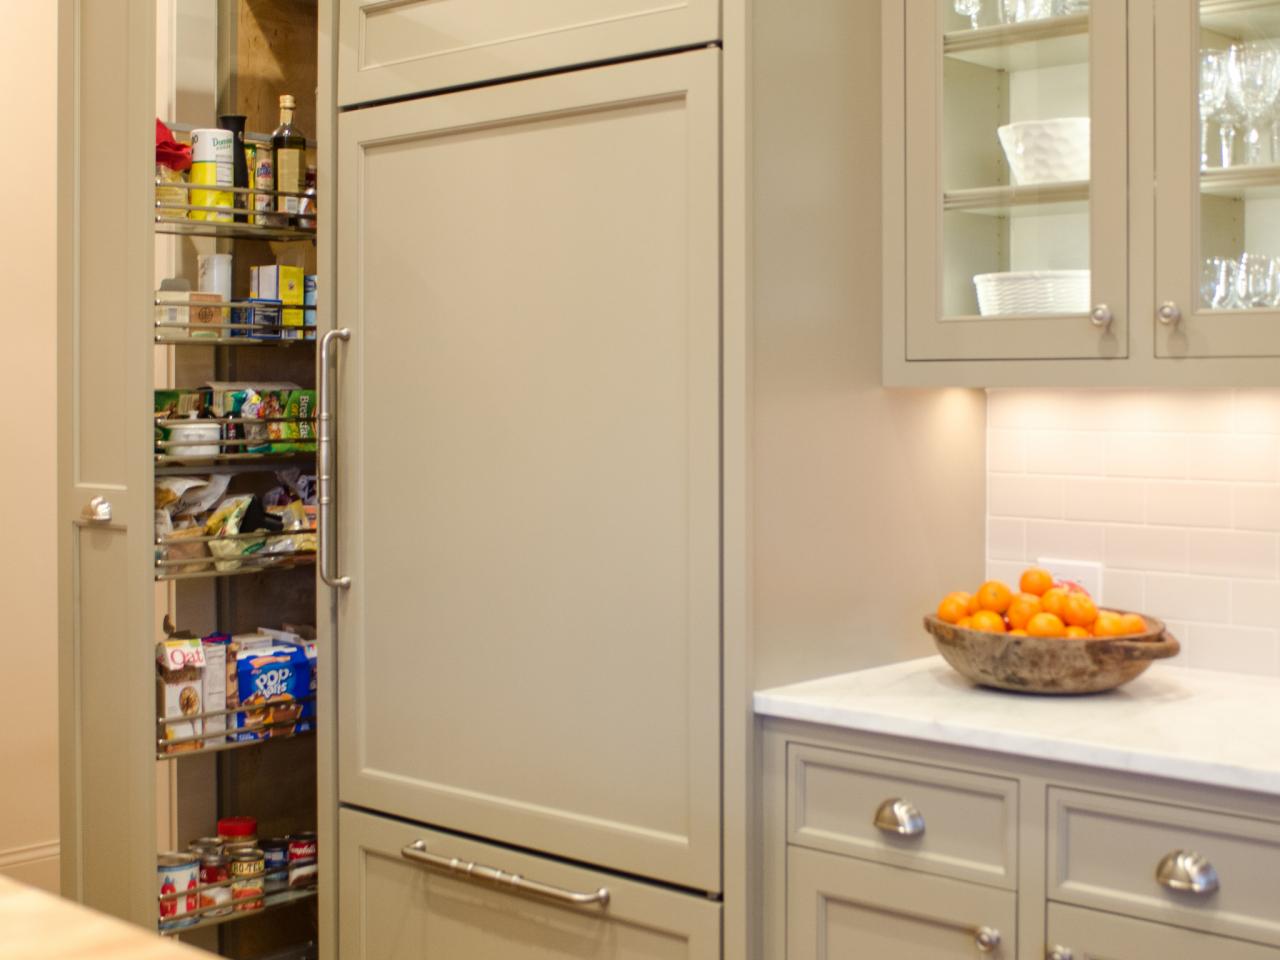 Pantry Cabinet Plans Pictures Options, Kitchen Pantry Storage Cabinet Ideas